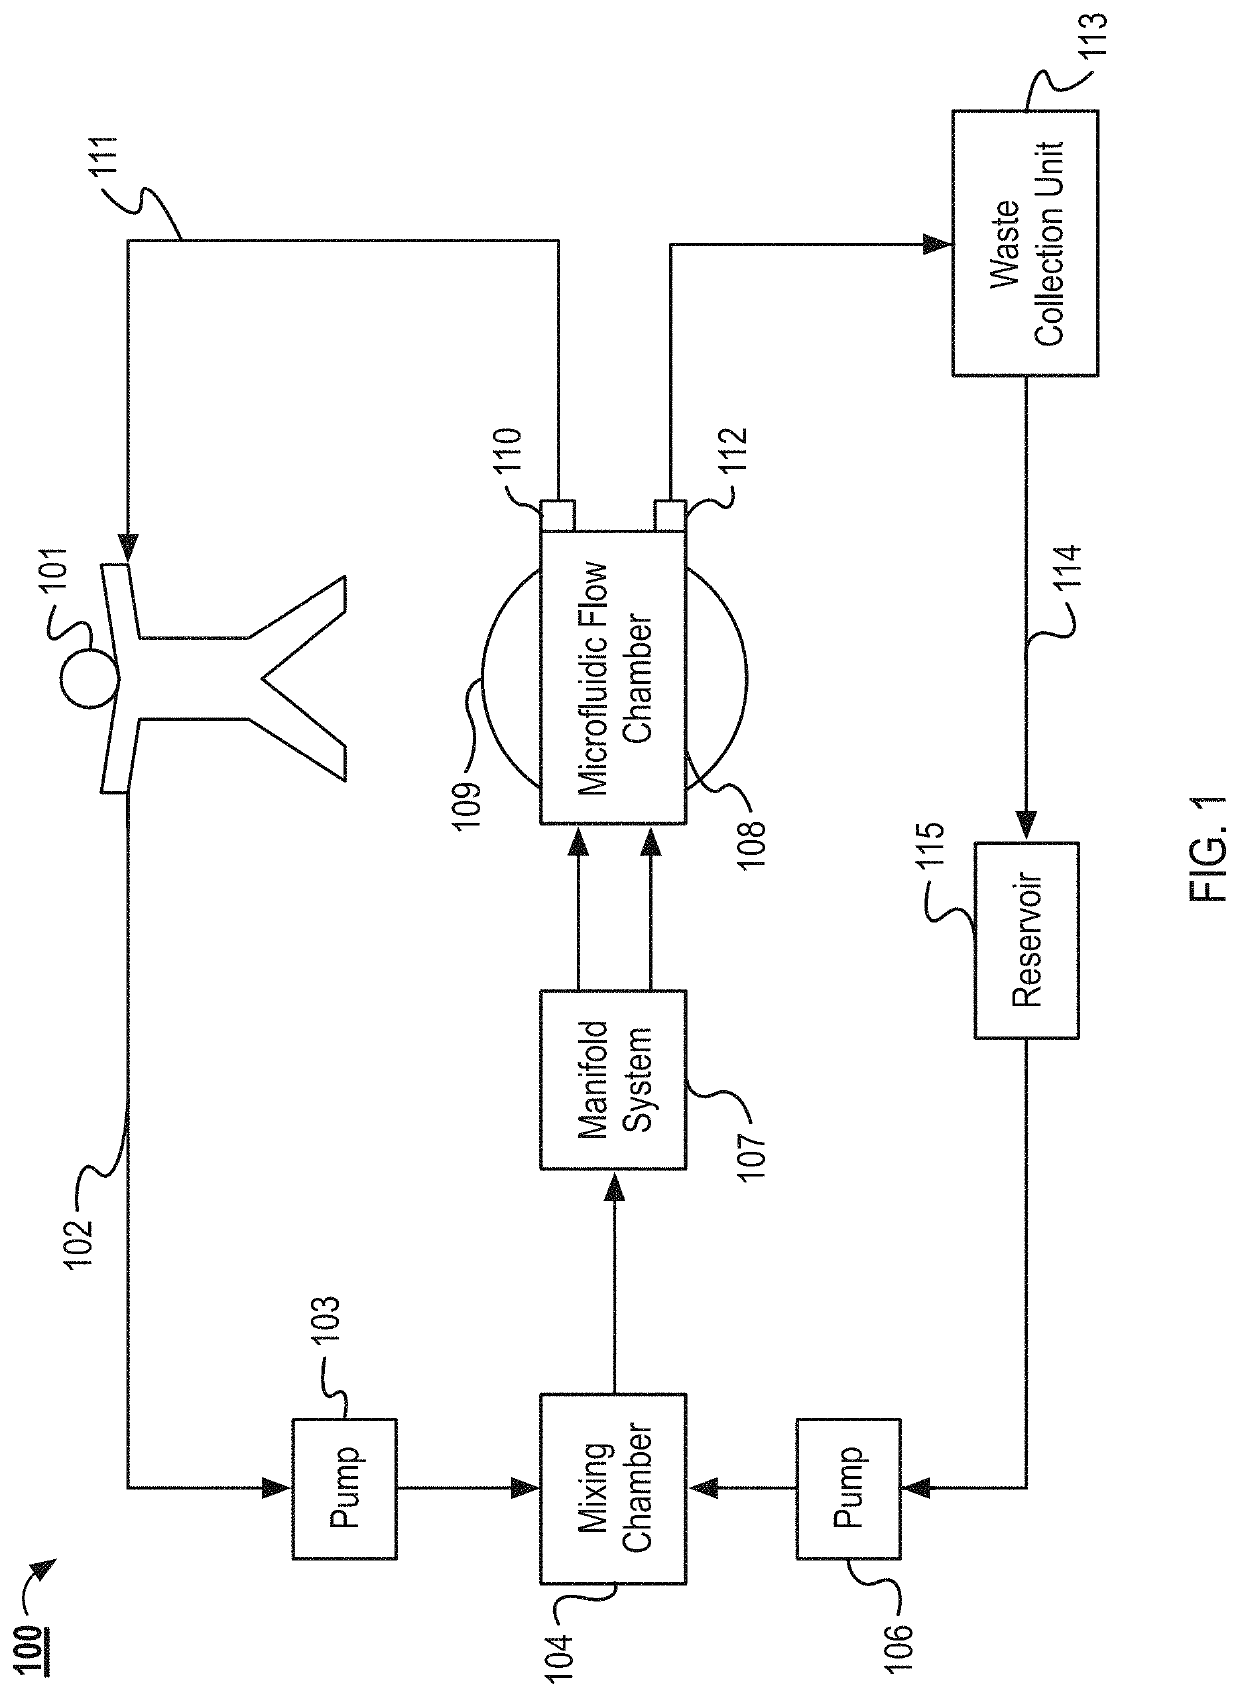 Systems and methods for parallel channel microfluidic separation